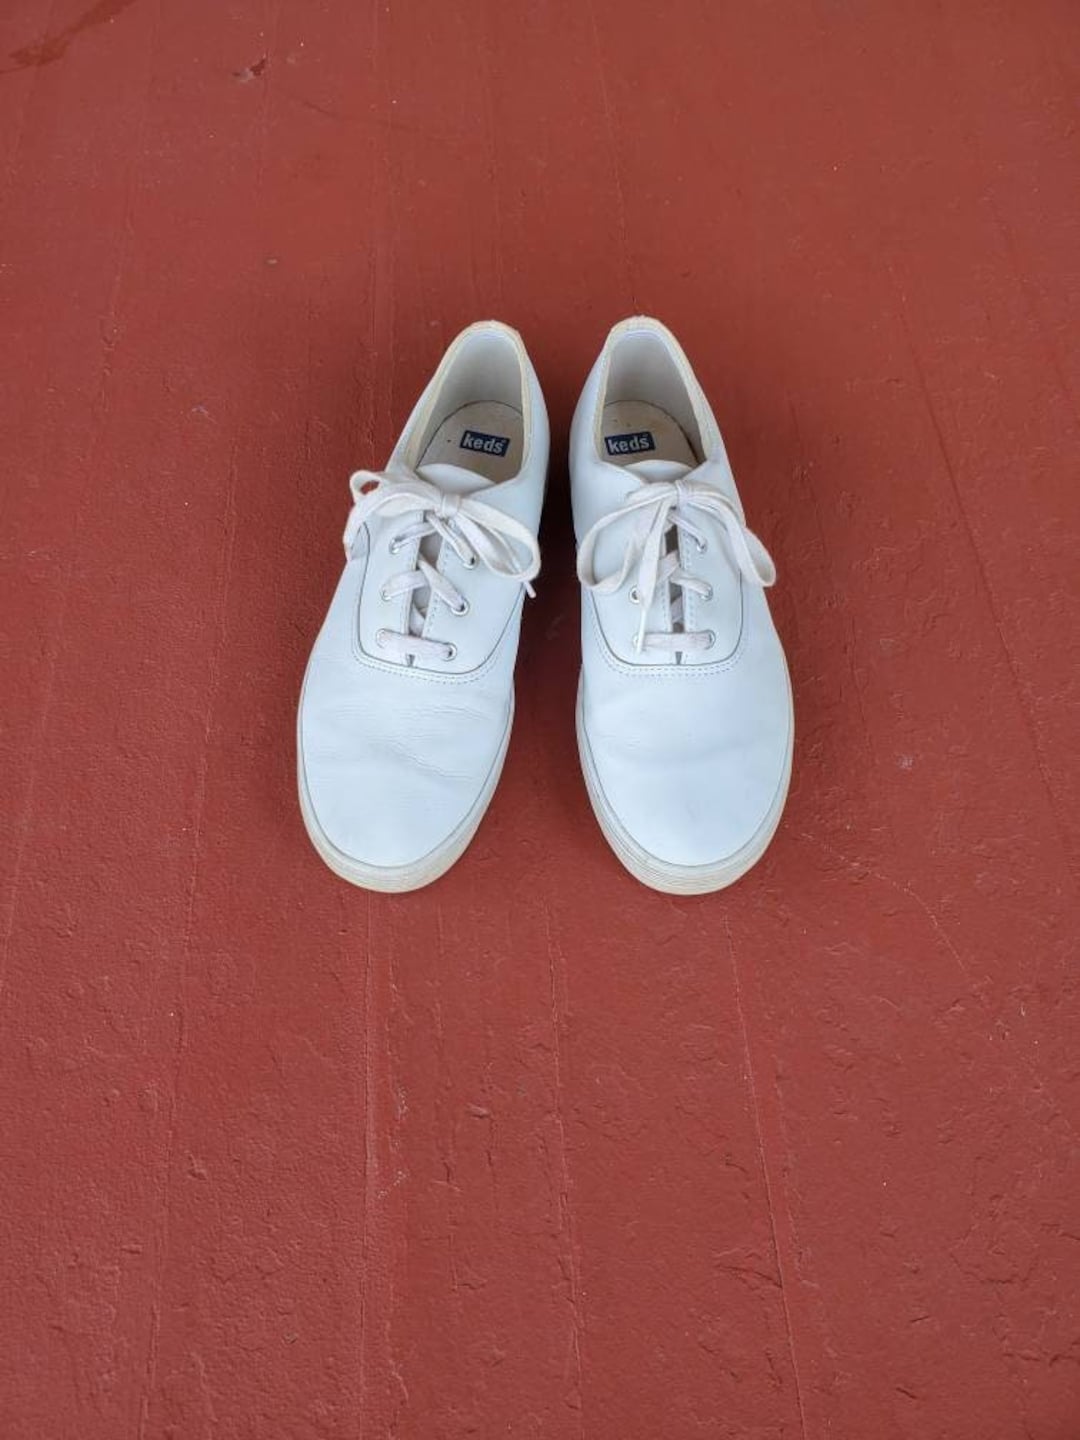 White Leather Keds Sneakers Women's Size 10 Men's Size - Etsy